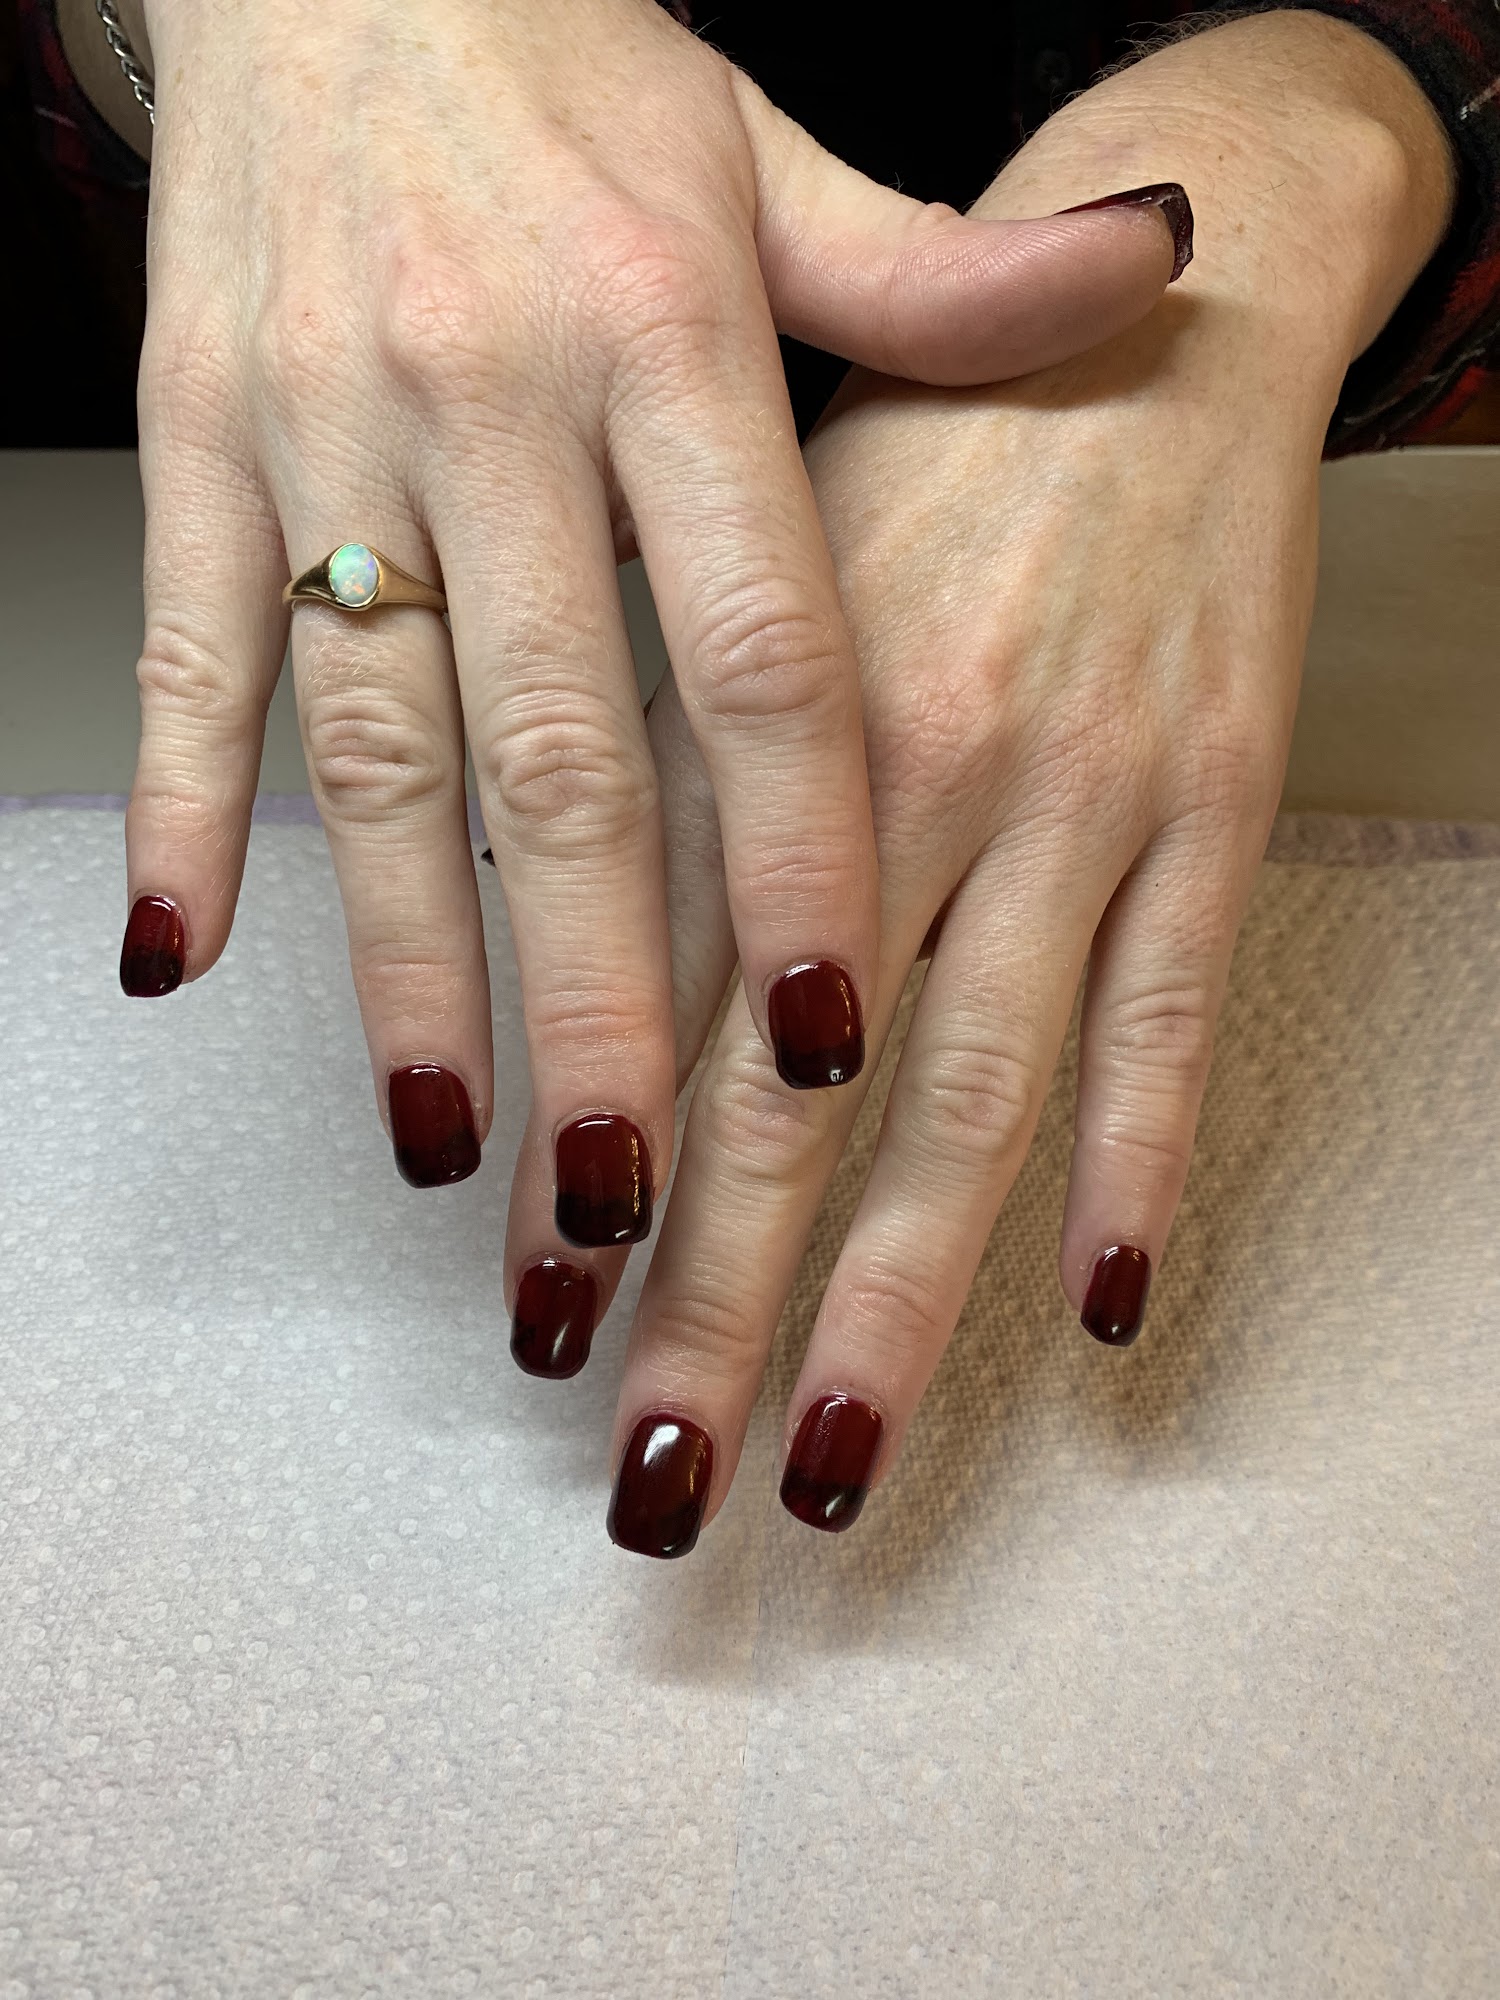 Pampered and Polished Salon and Spa 8 Sherring St S, Hagersville Ontario N0A 1H0